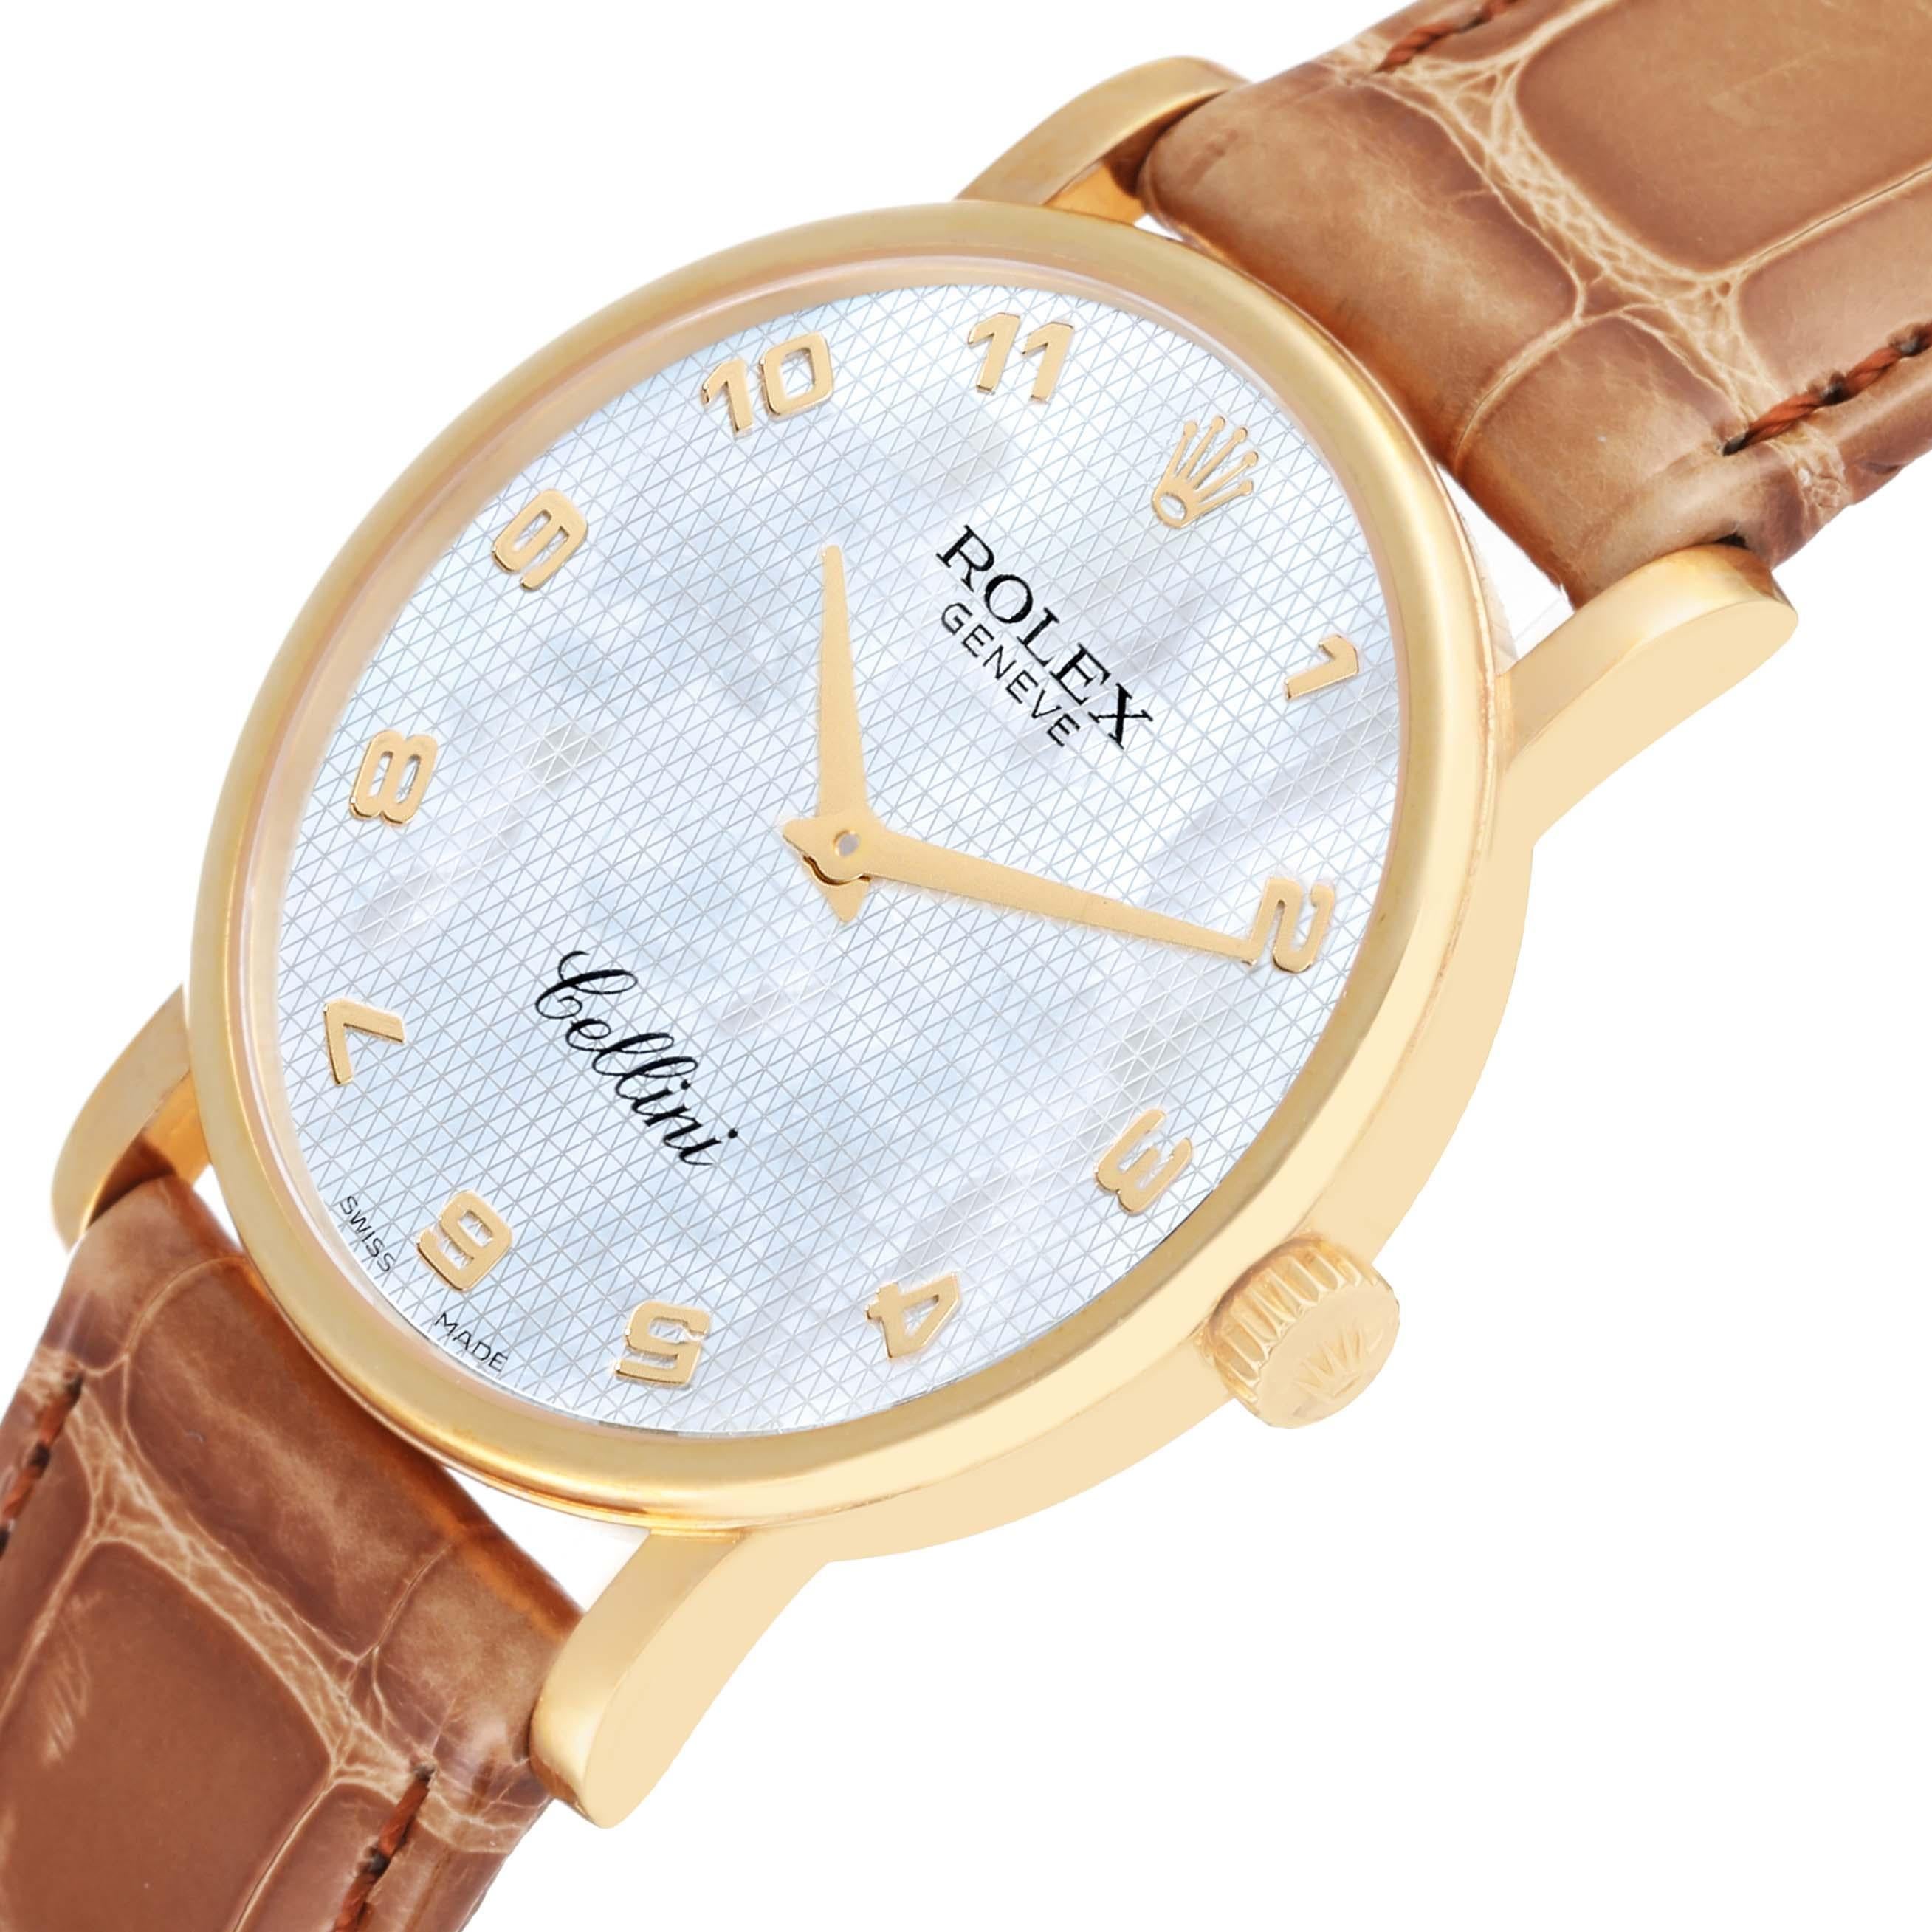 Rolex Cellini Classic Yellow Gold Mother Of Pearl Dial Mens Watch 5115 Unworn 1